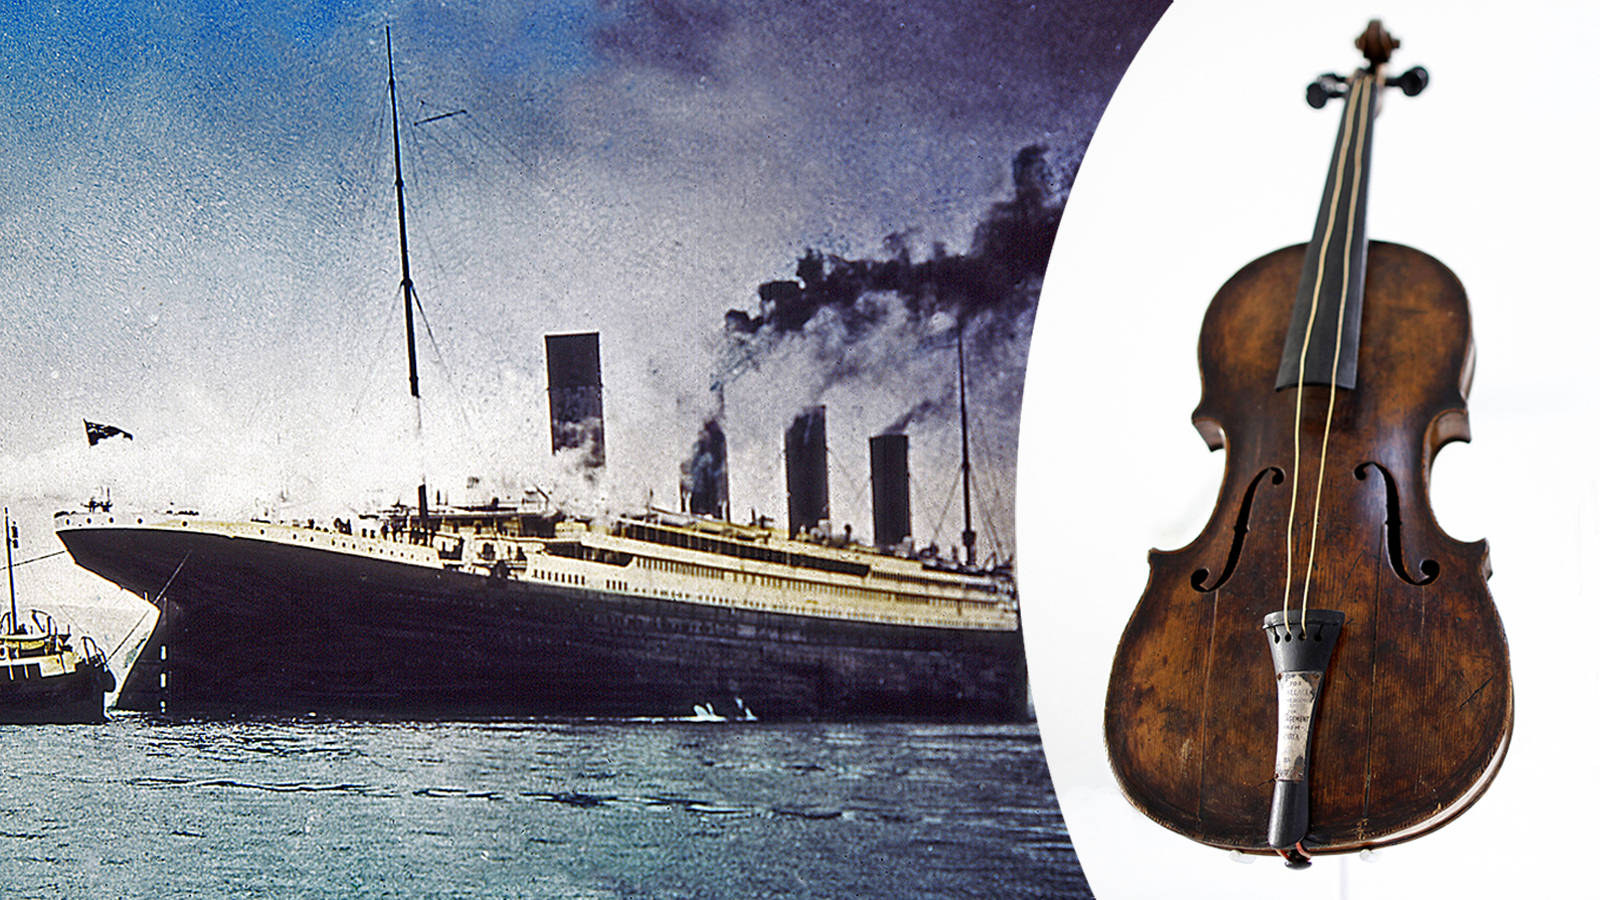 The 110-year-old Titanic violin that miraculously survived the sinking 